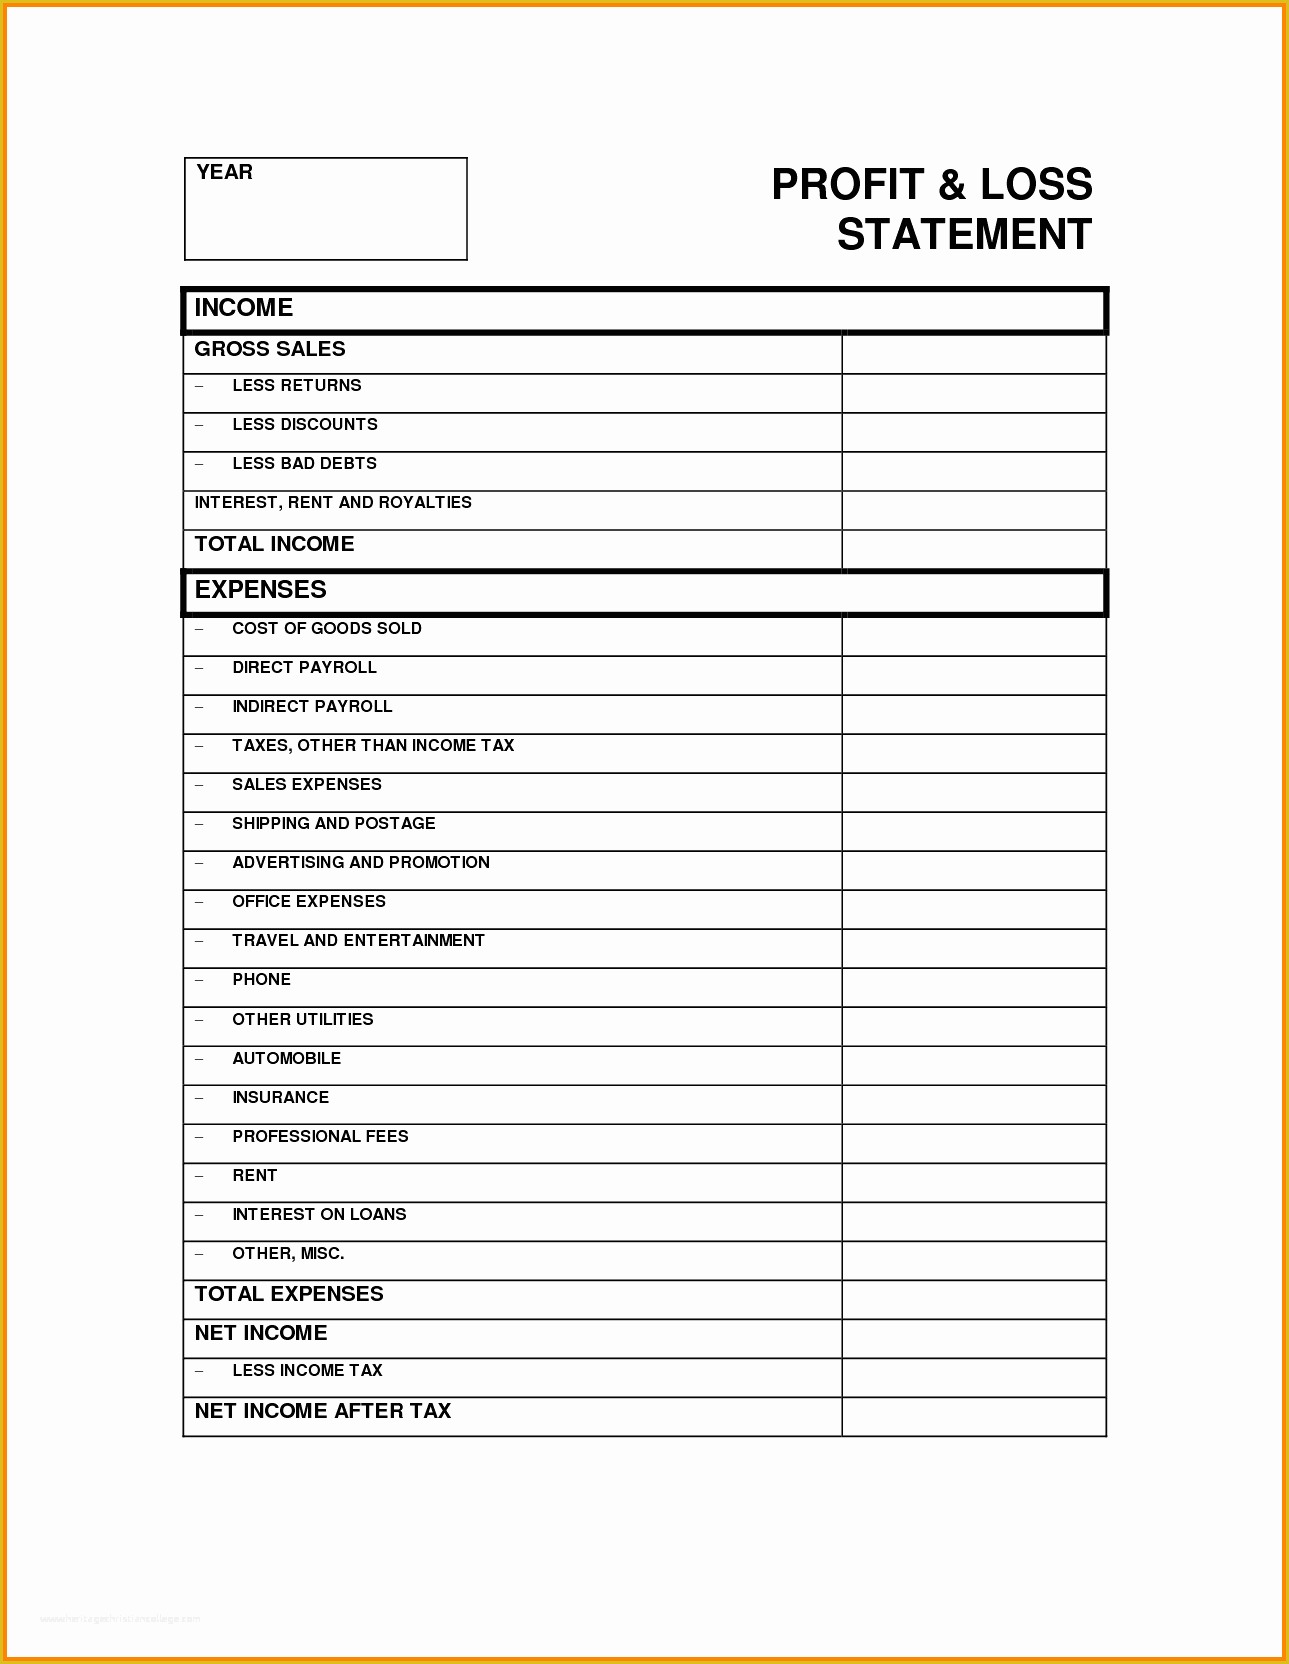 Free Profit and Loss Template for Self Employed Of Business Profit and Loss Statement for Self Employed Mughals